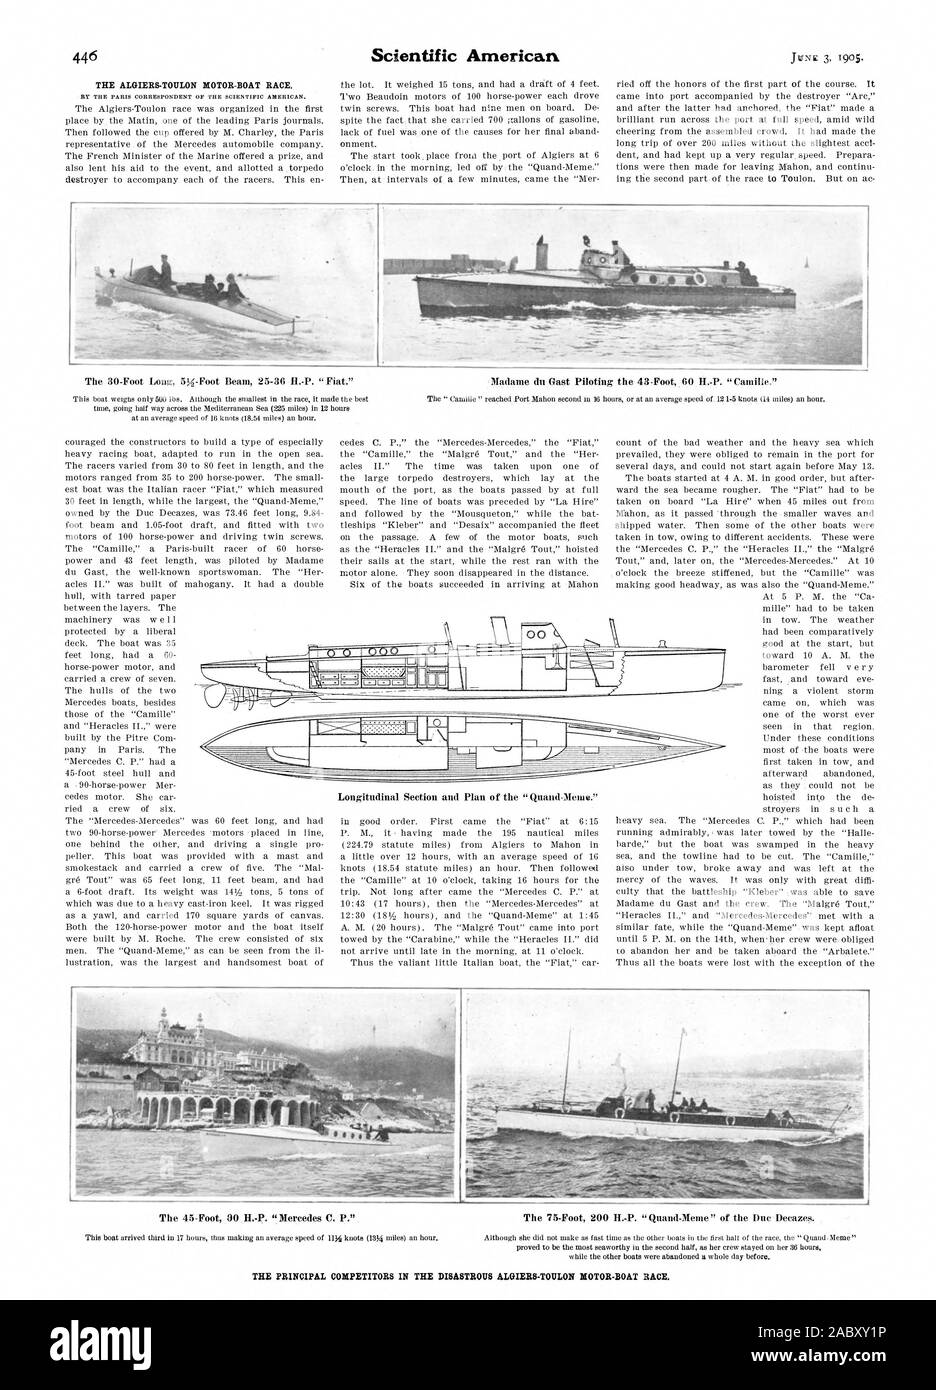 The 30-Foot Long 5'-Foot Beam 25-36.-P. 'Fiat.' Madame du Gast Piloting the 43-Foot 60 'Camille.' The 45-Foot 90 II.-P. 'Mercedes C. P.' The 75-Foot 200 II.-P. 'Quand-Meme' of' the Due  Decazes. THE PRINCIPAL COMPETITORS IN THE DISASTROUS ALOIERS-TOULON MOTOR-BOAT RACE., scientific american, 1905-06-03 Stock Photo